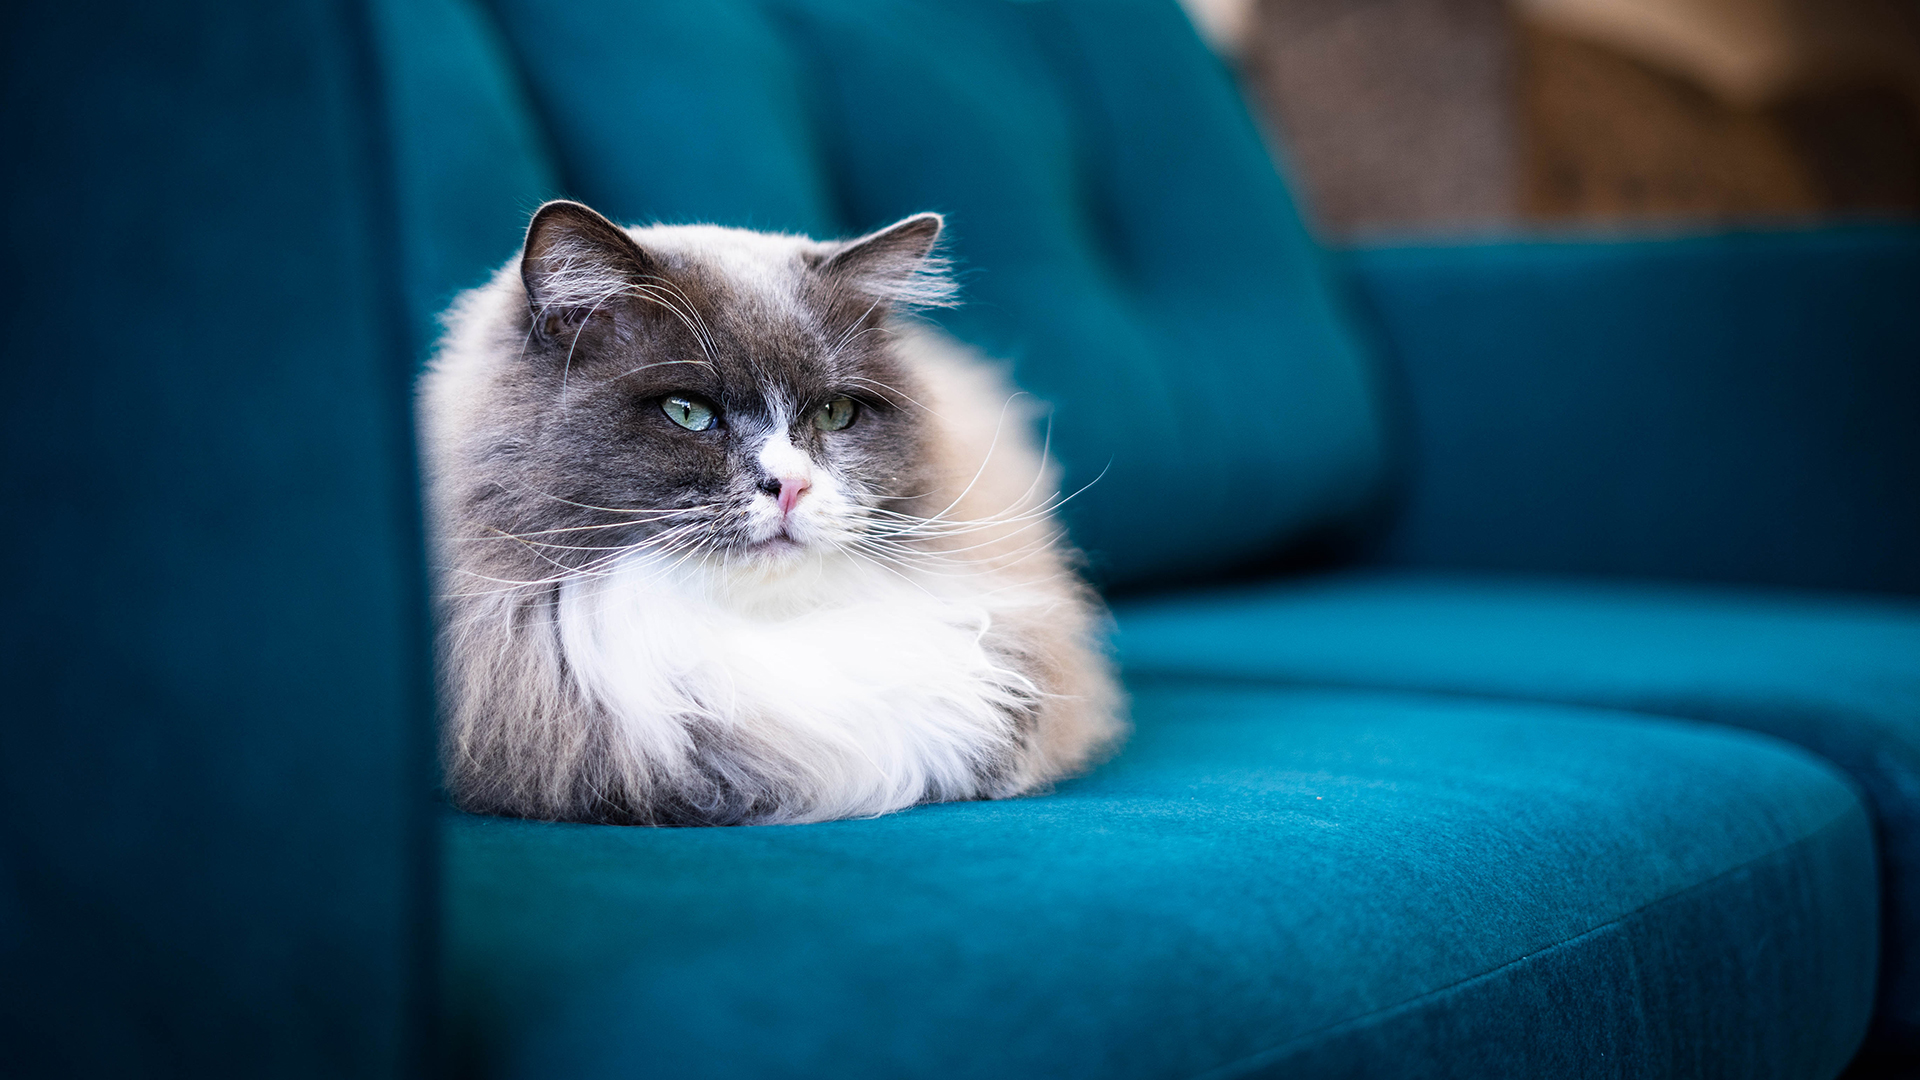 Purrfect sofas for relaxation